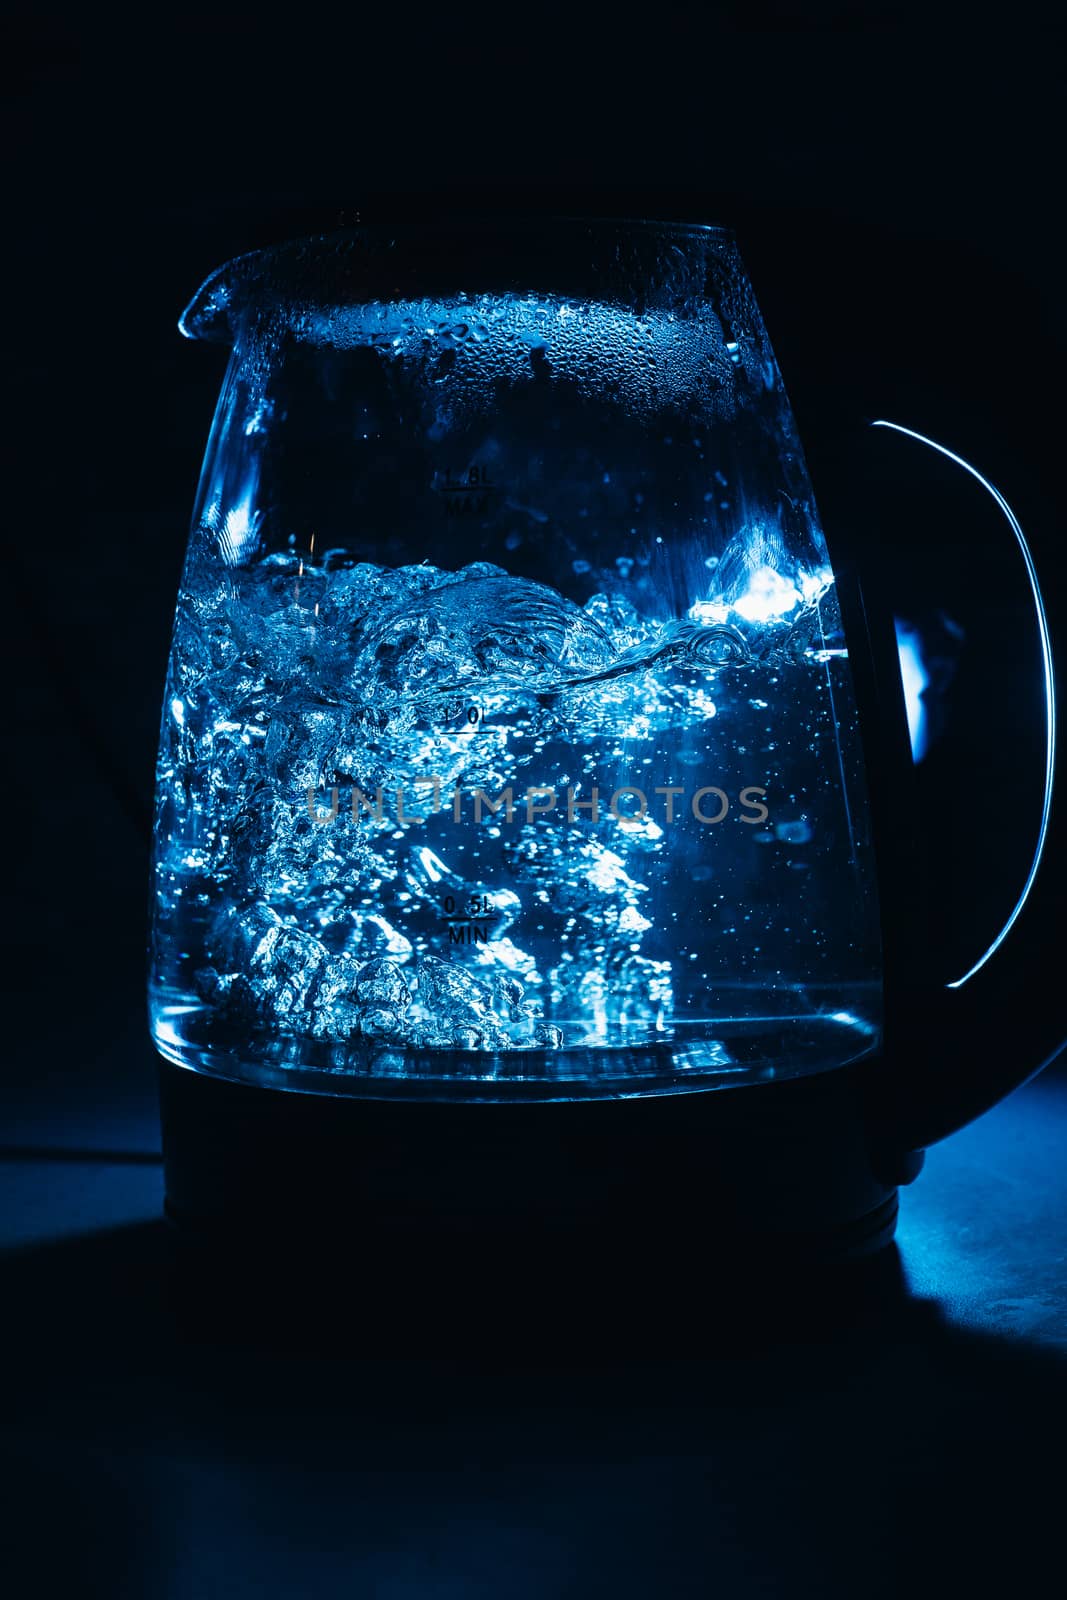 Boiling glass black teapot with blue backlight on a black background. Boiling water. Hot water is seething. Bubbles of air in the water.